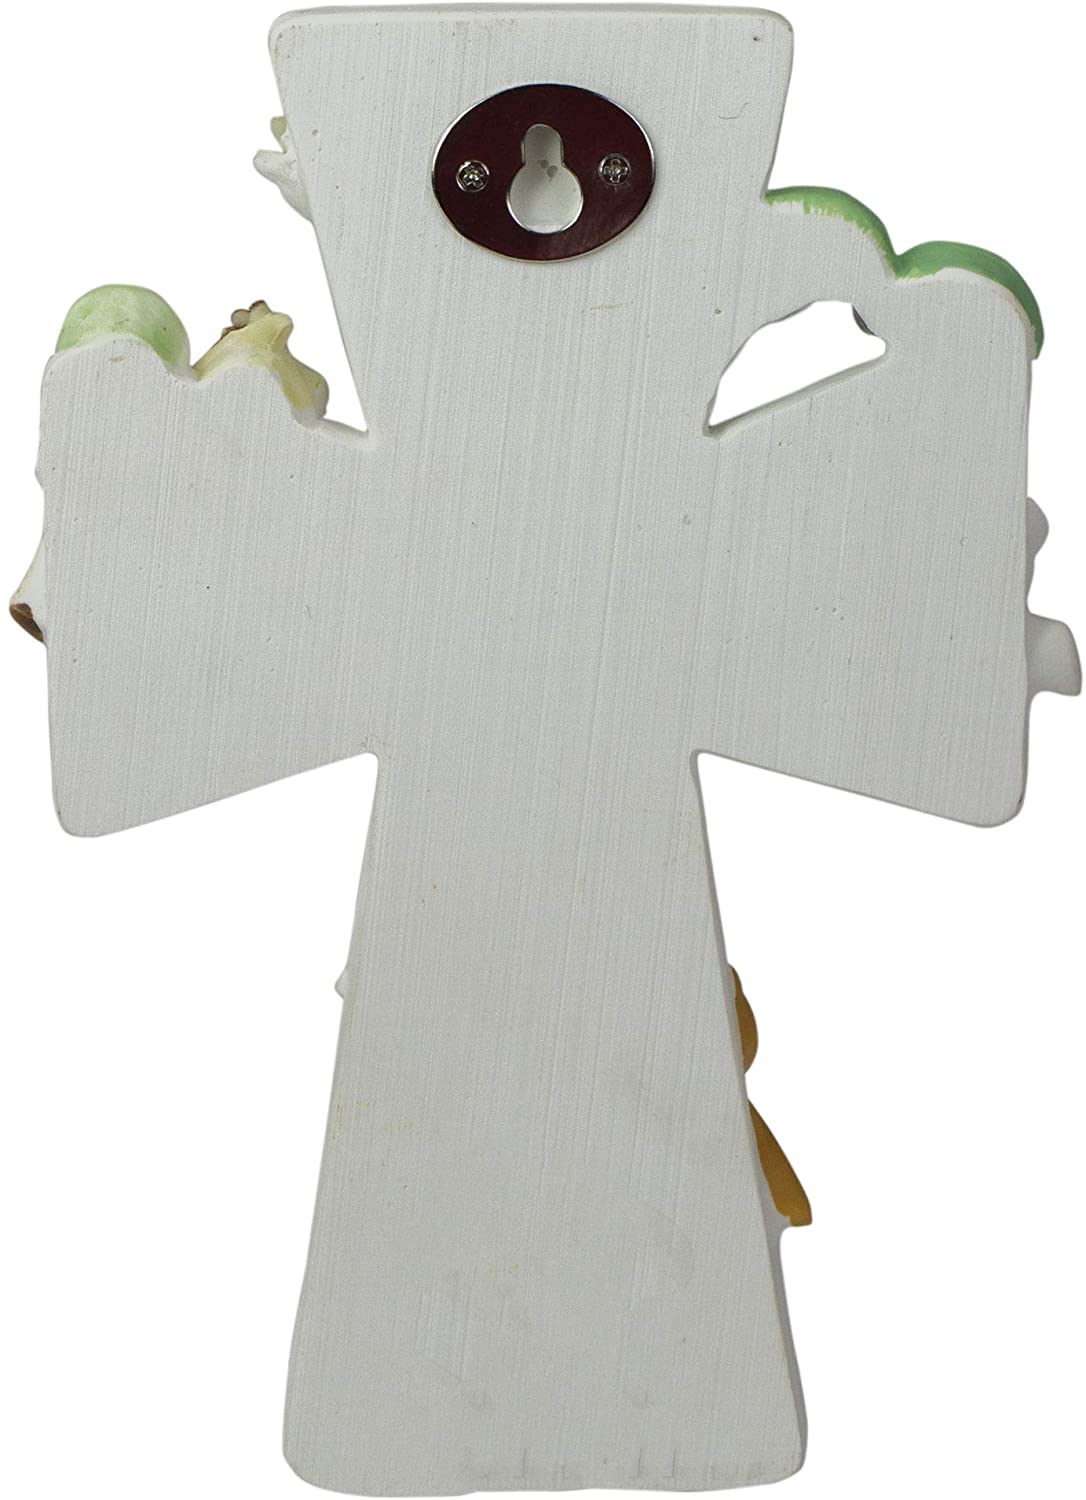 God Created Everything 7 inch Resin Stone Decorative Hanging Wall Cross